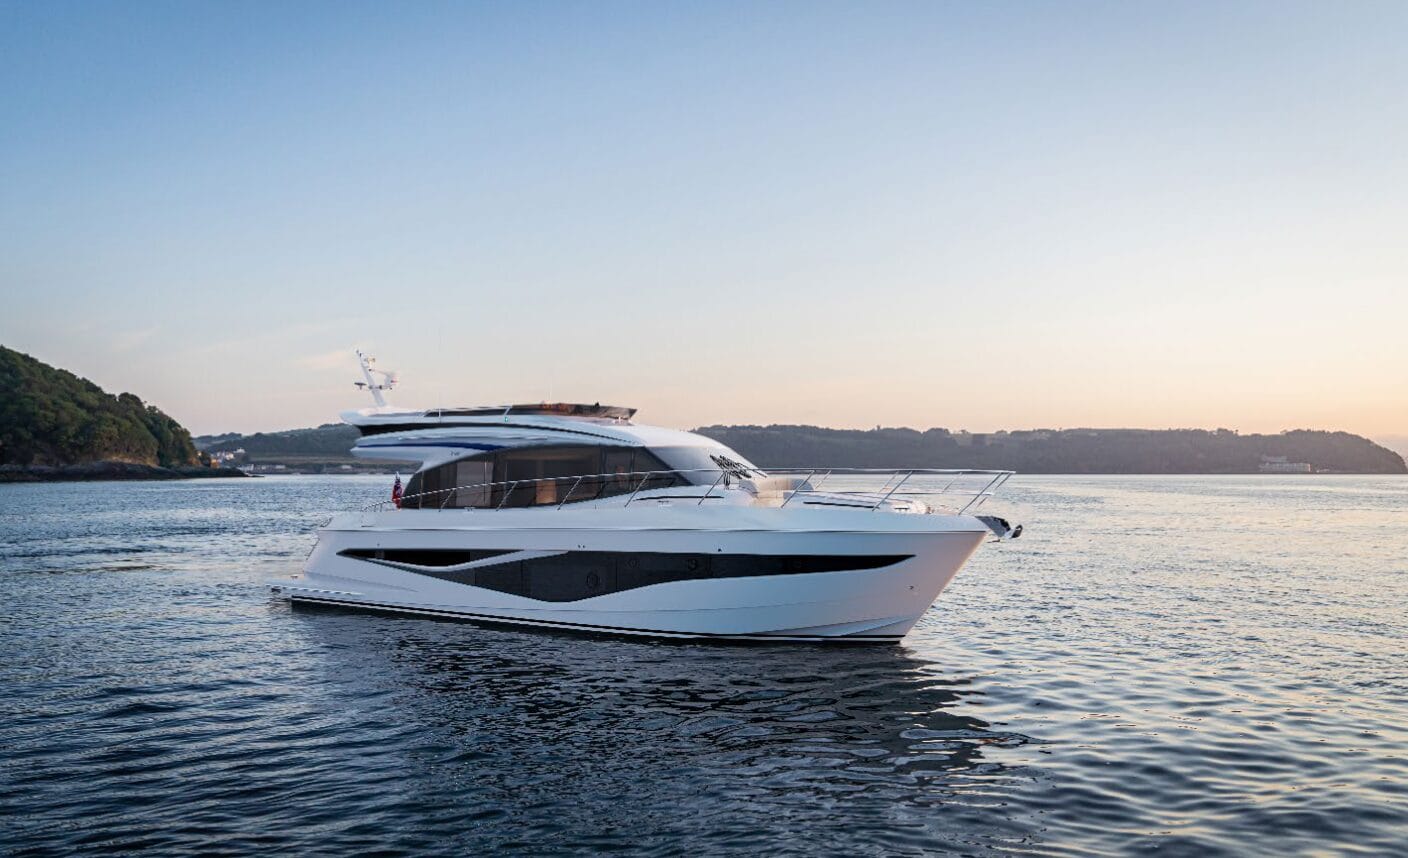 PRINCESS YACHTS INTRODUCE AN EXCITING ADDITION TO THE ICONIC F CLASS RANGE – THE ALL-NEW PRINCESS F58